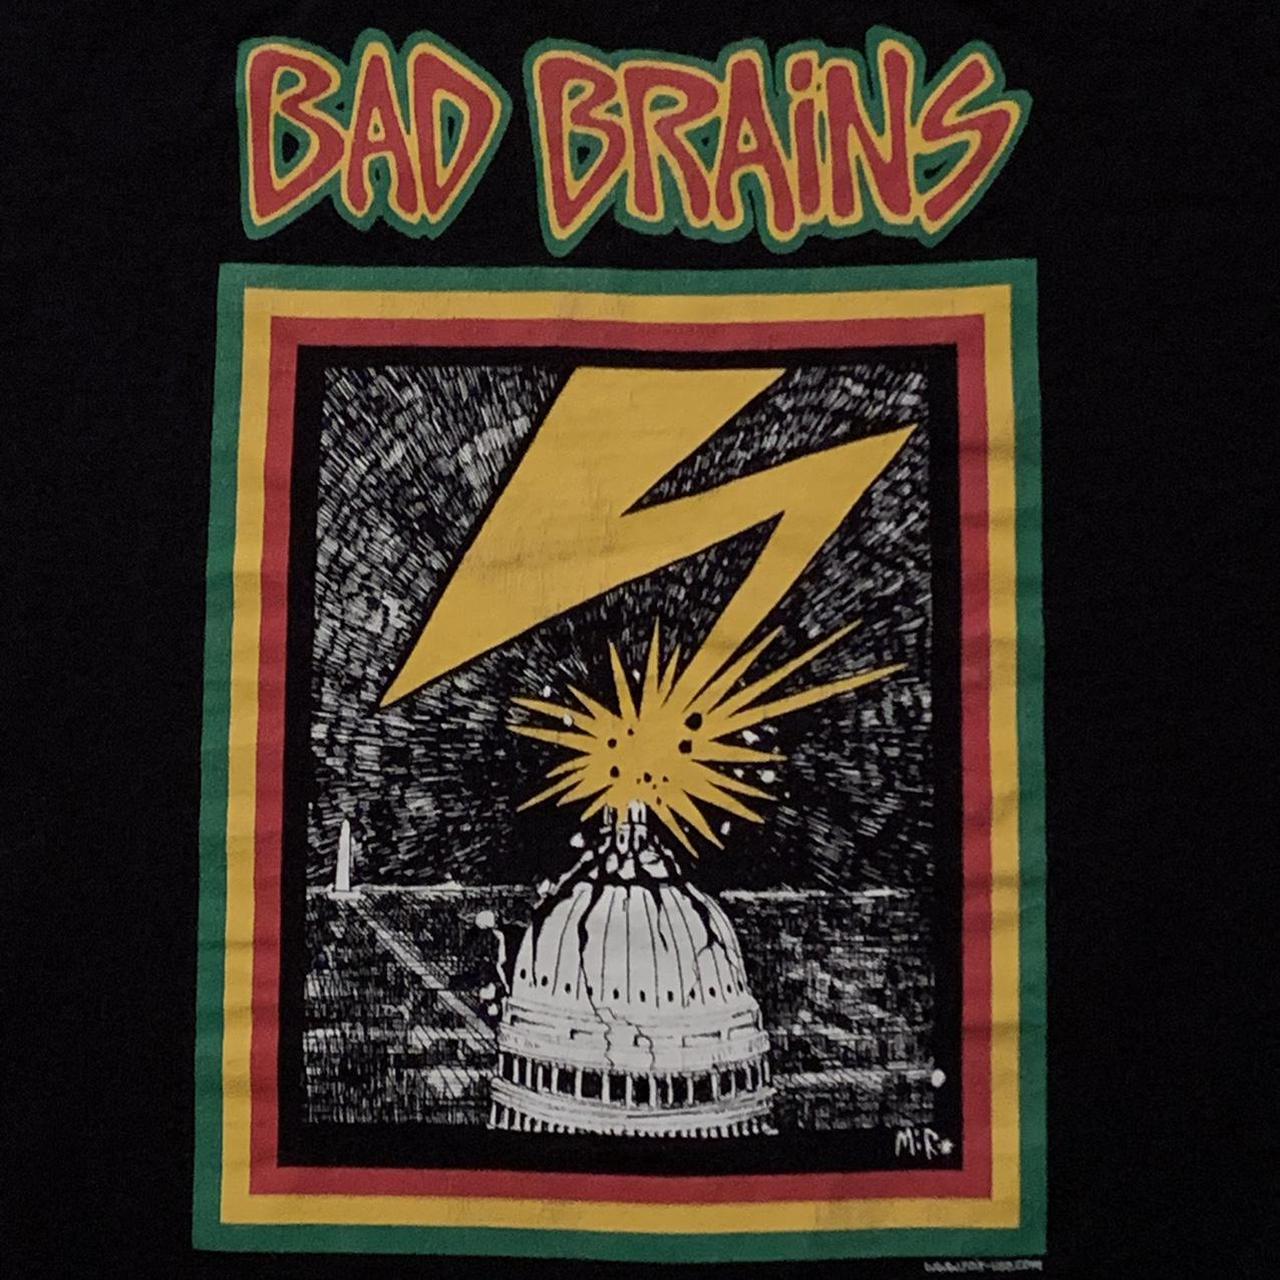 Product Image 2 - Bad Brains t-shirt. FREE SHIPPING!
Size:XL
Arm